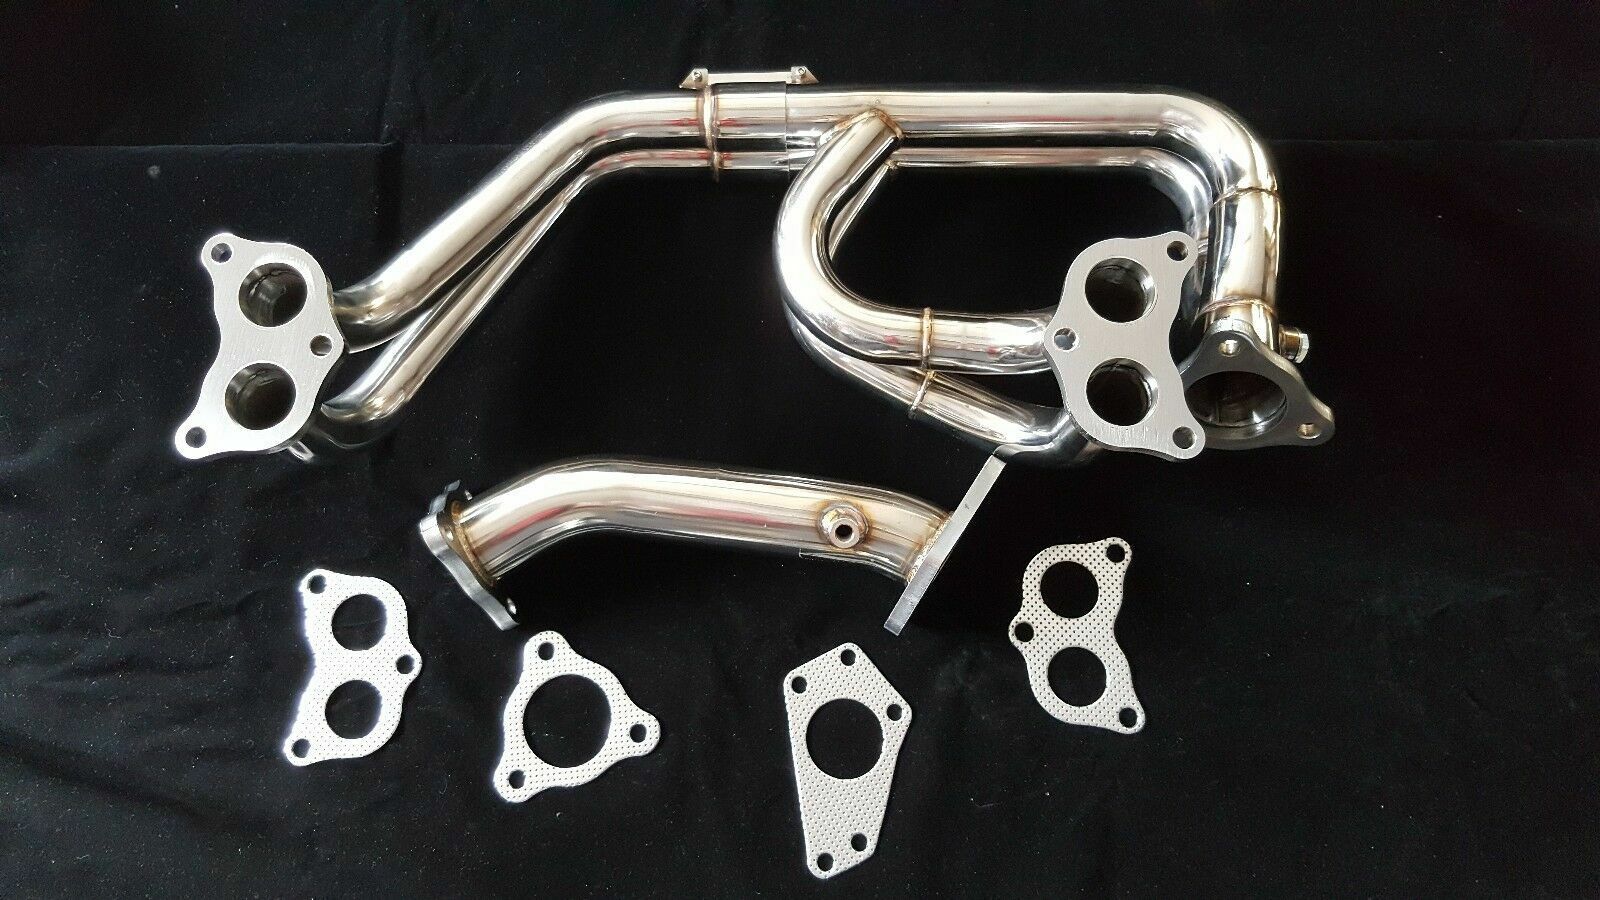 999RACING /KS exhaust RACING MANIFOLD/HEADER FOR FORESTER GT EJ20 TURBO